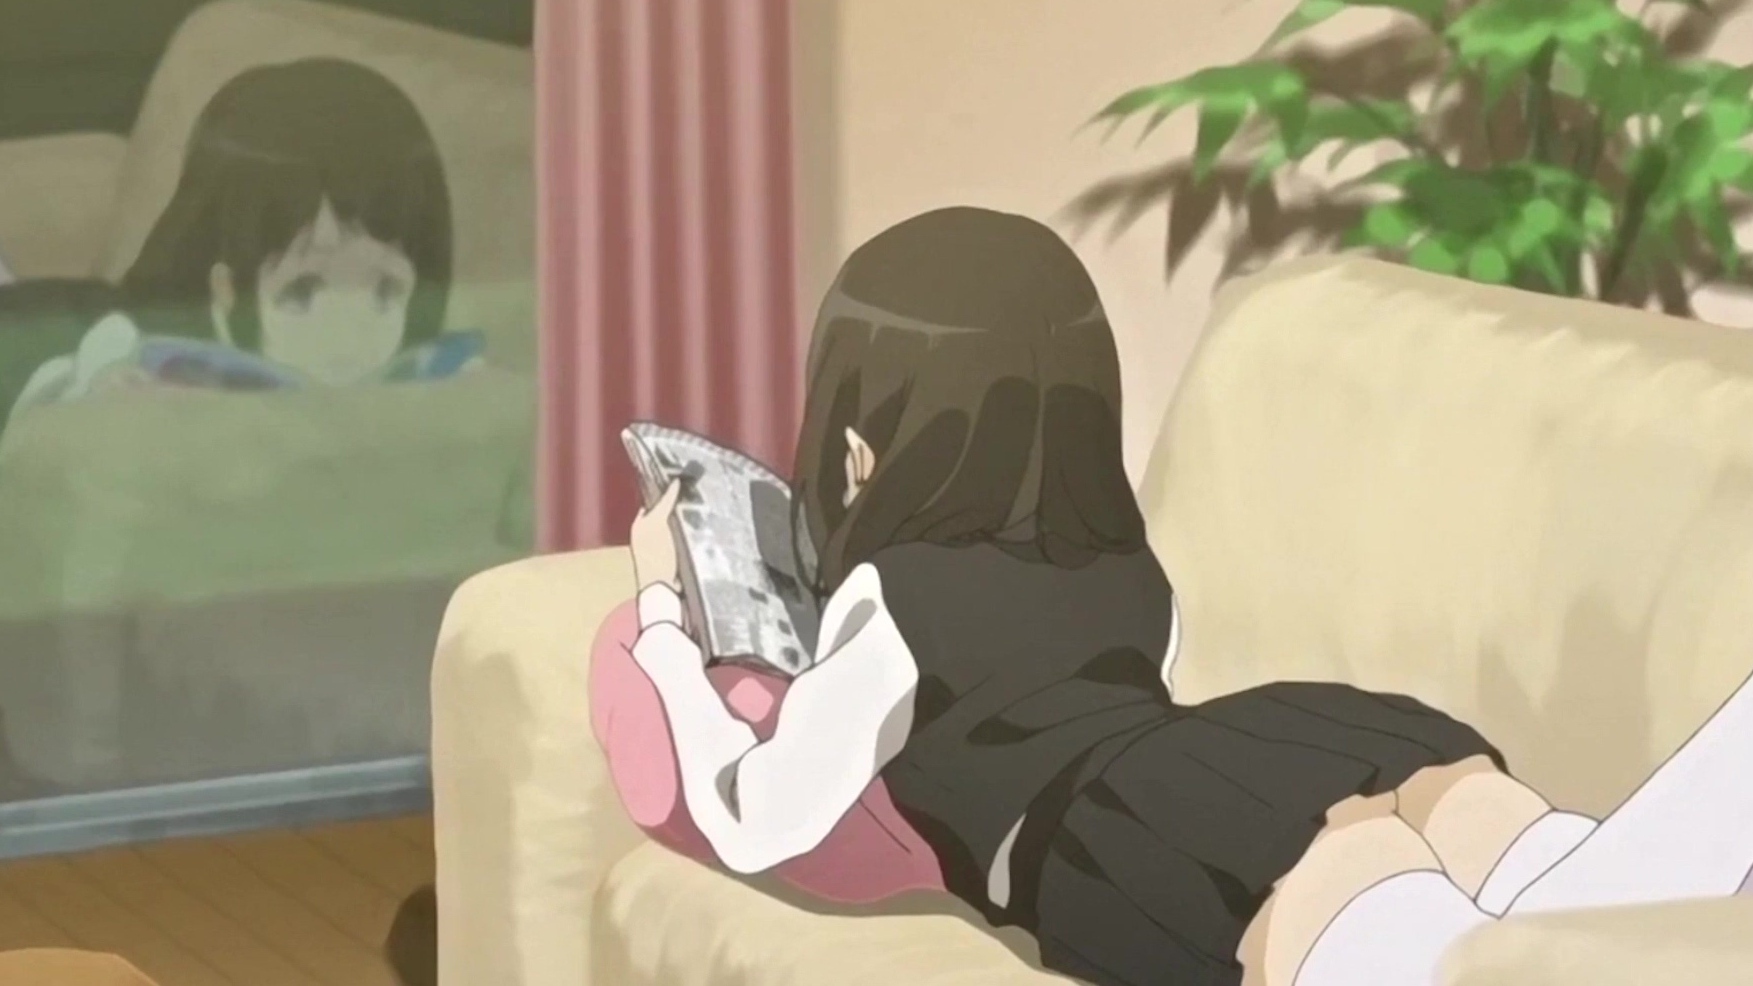 Hentai school girl is raw analized by pervert fellow on a couch image